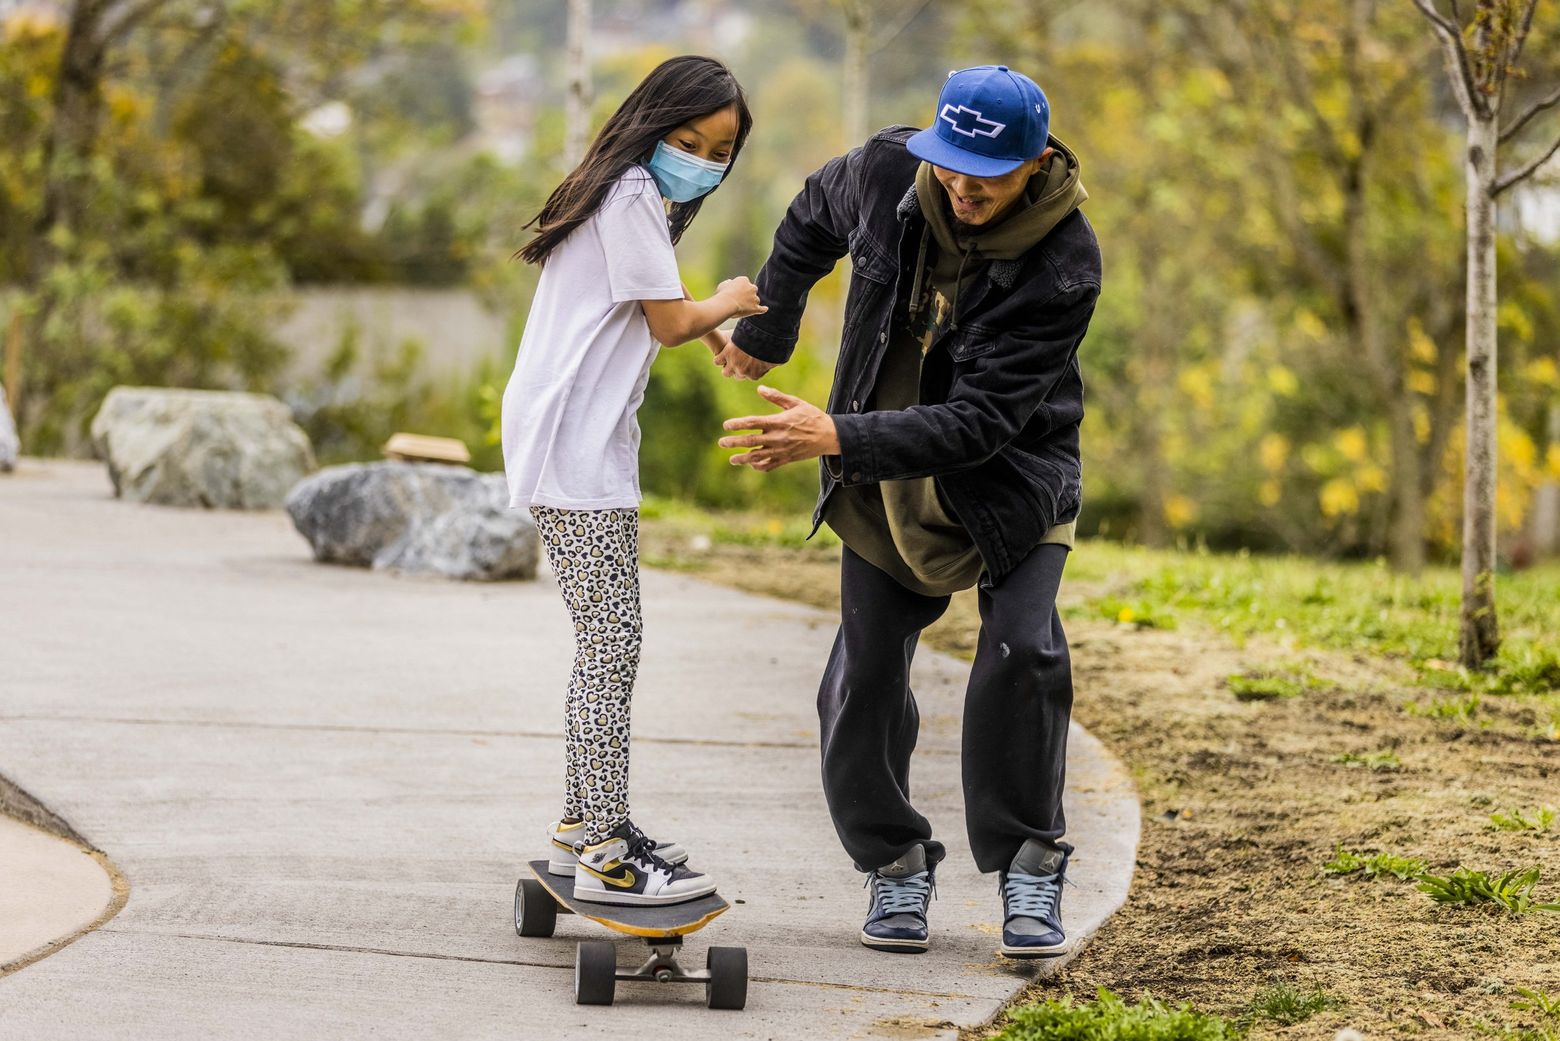 Hertogin Walter Cunningham Catena Learning to skateboard, start slow and low | The Seattle Times